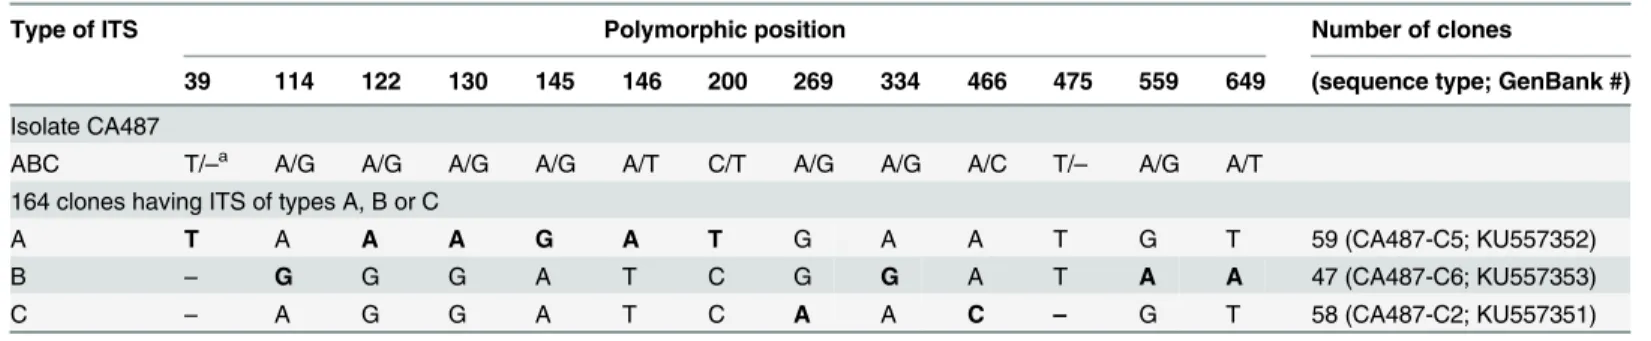 Table 3. Types of ITS revealed by polymorphisms at 13 positions among 164 clones of CA487.